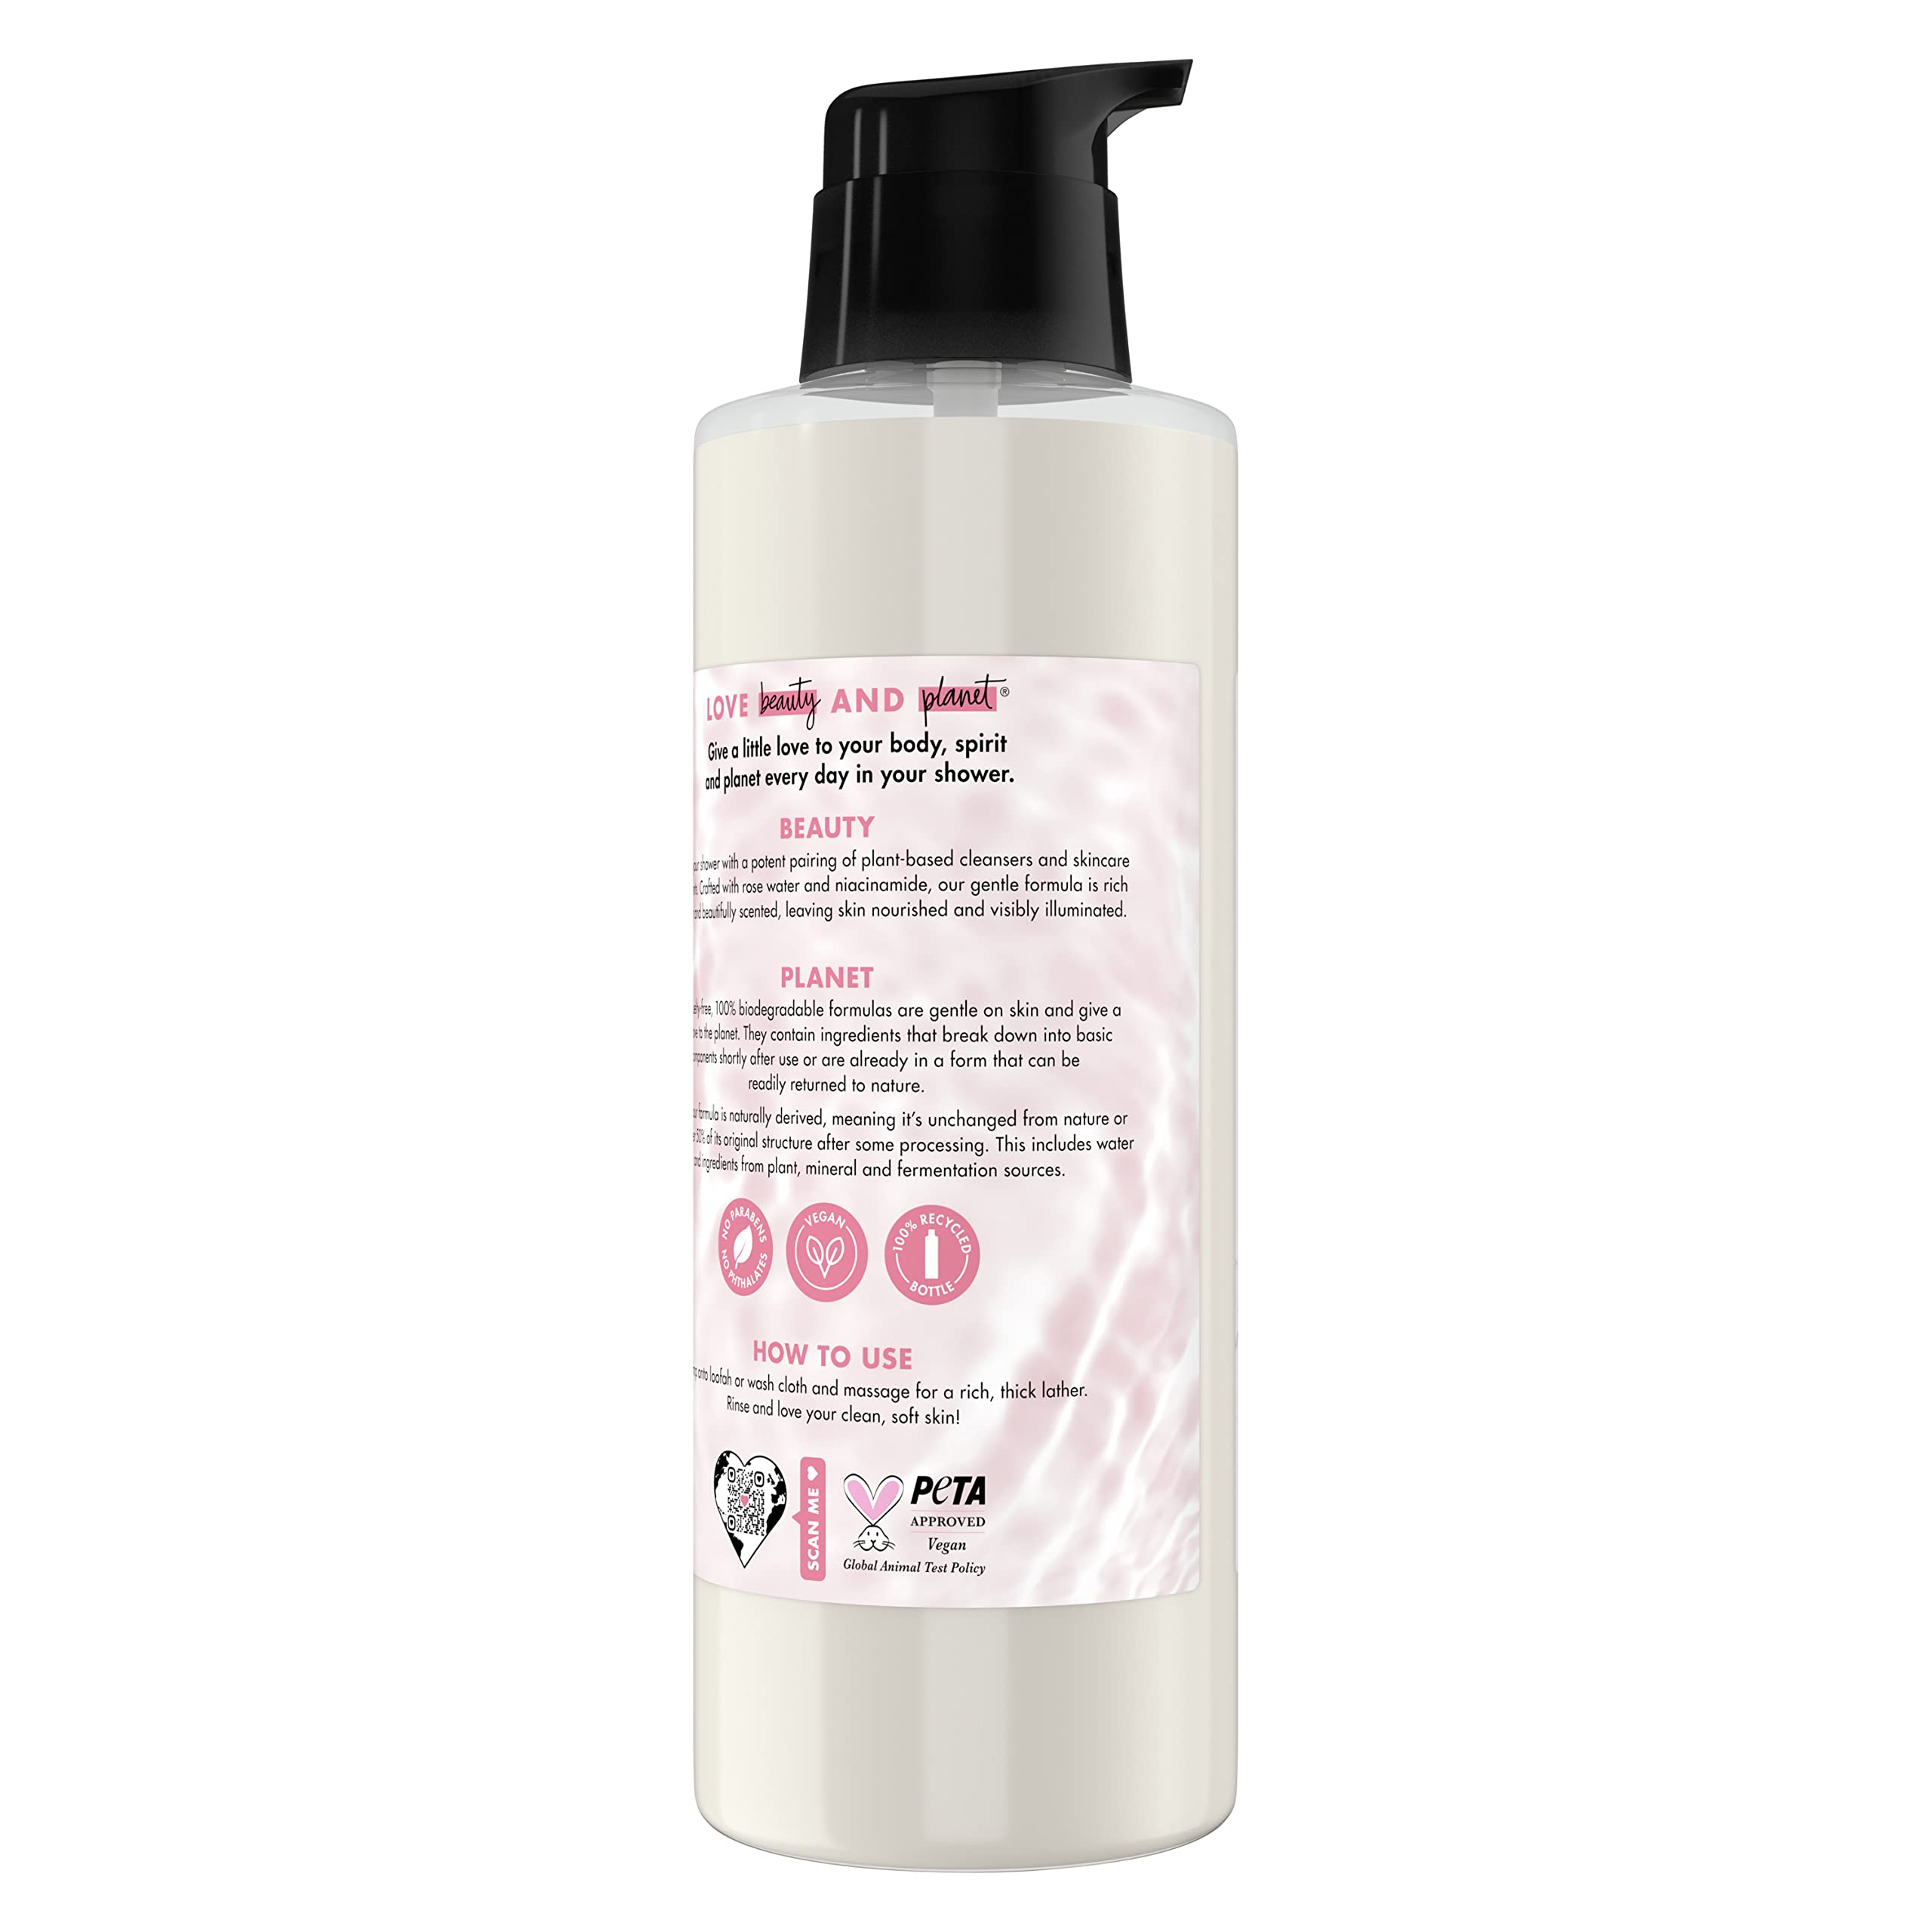 Love Beauty And Planet Plant-Based Body Wash Nourish and Illuminate Skin Rose Water and Niacinamide Made with Plant-Based Cleansers and Skin Care Ingredients 32.3 fl oz